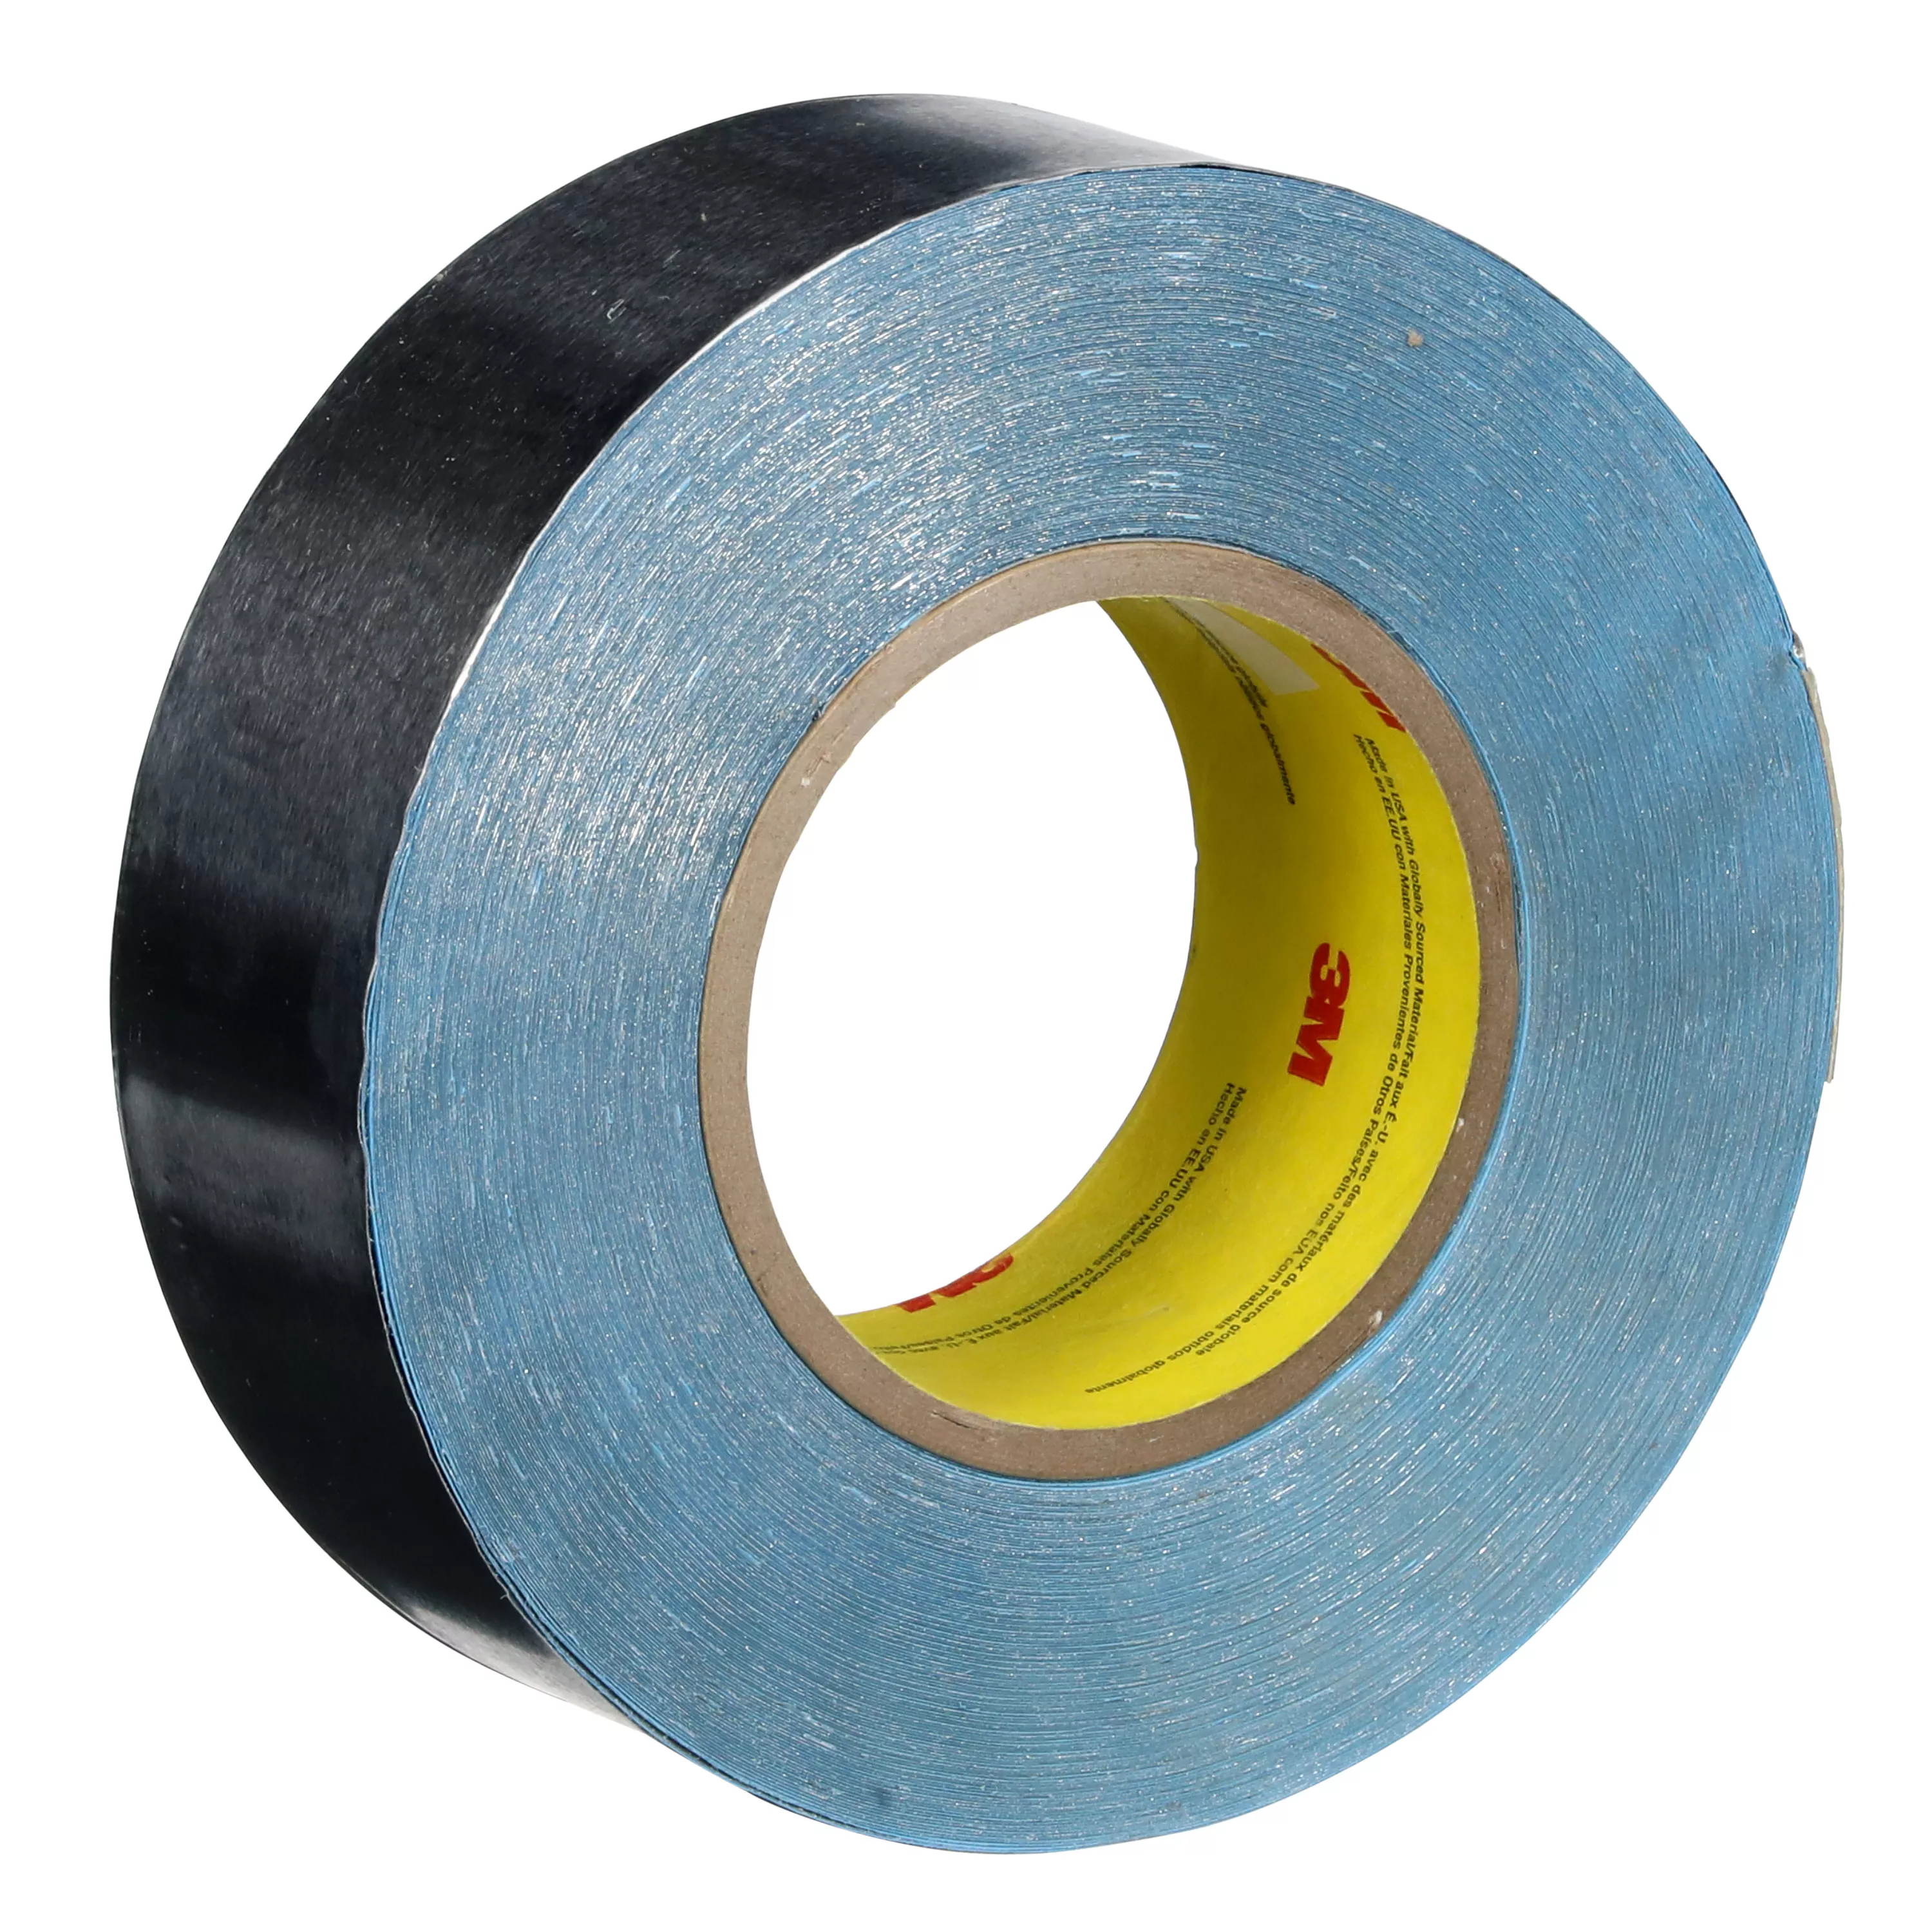 3M™ Vibration Damping Tape 434, Silver, 1 in x 60 yd, 7.5 mil, 9
Roll/Case